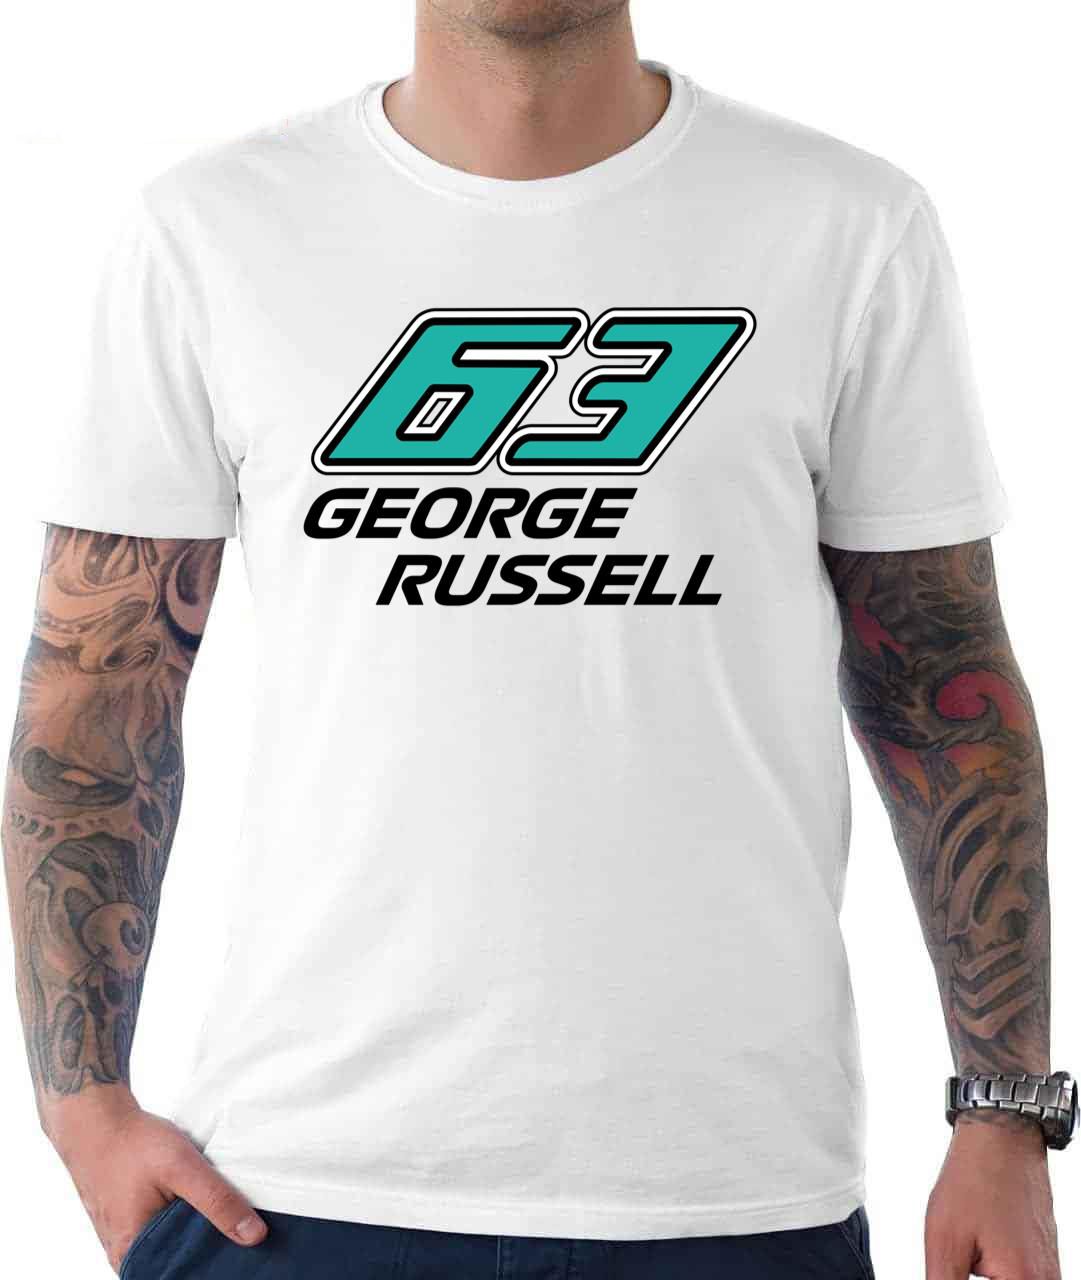 Cool Design Of George Russell 63 For 2022 Logo Tee Shirt ...